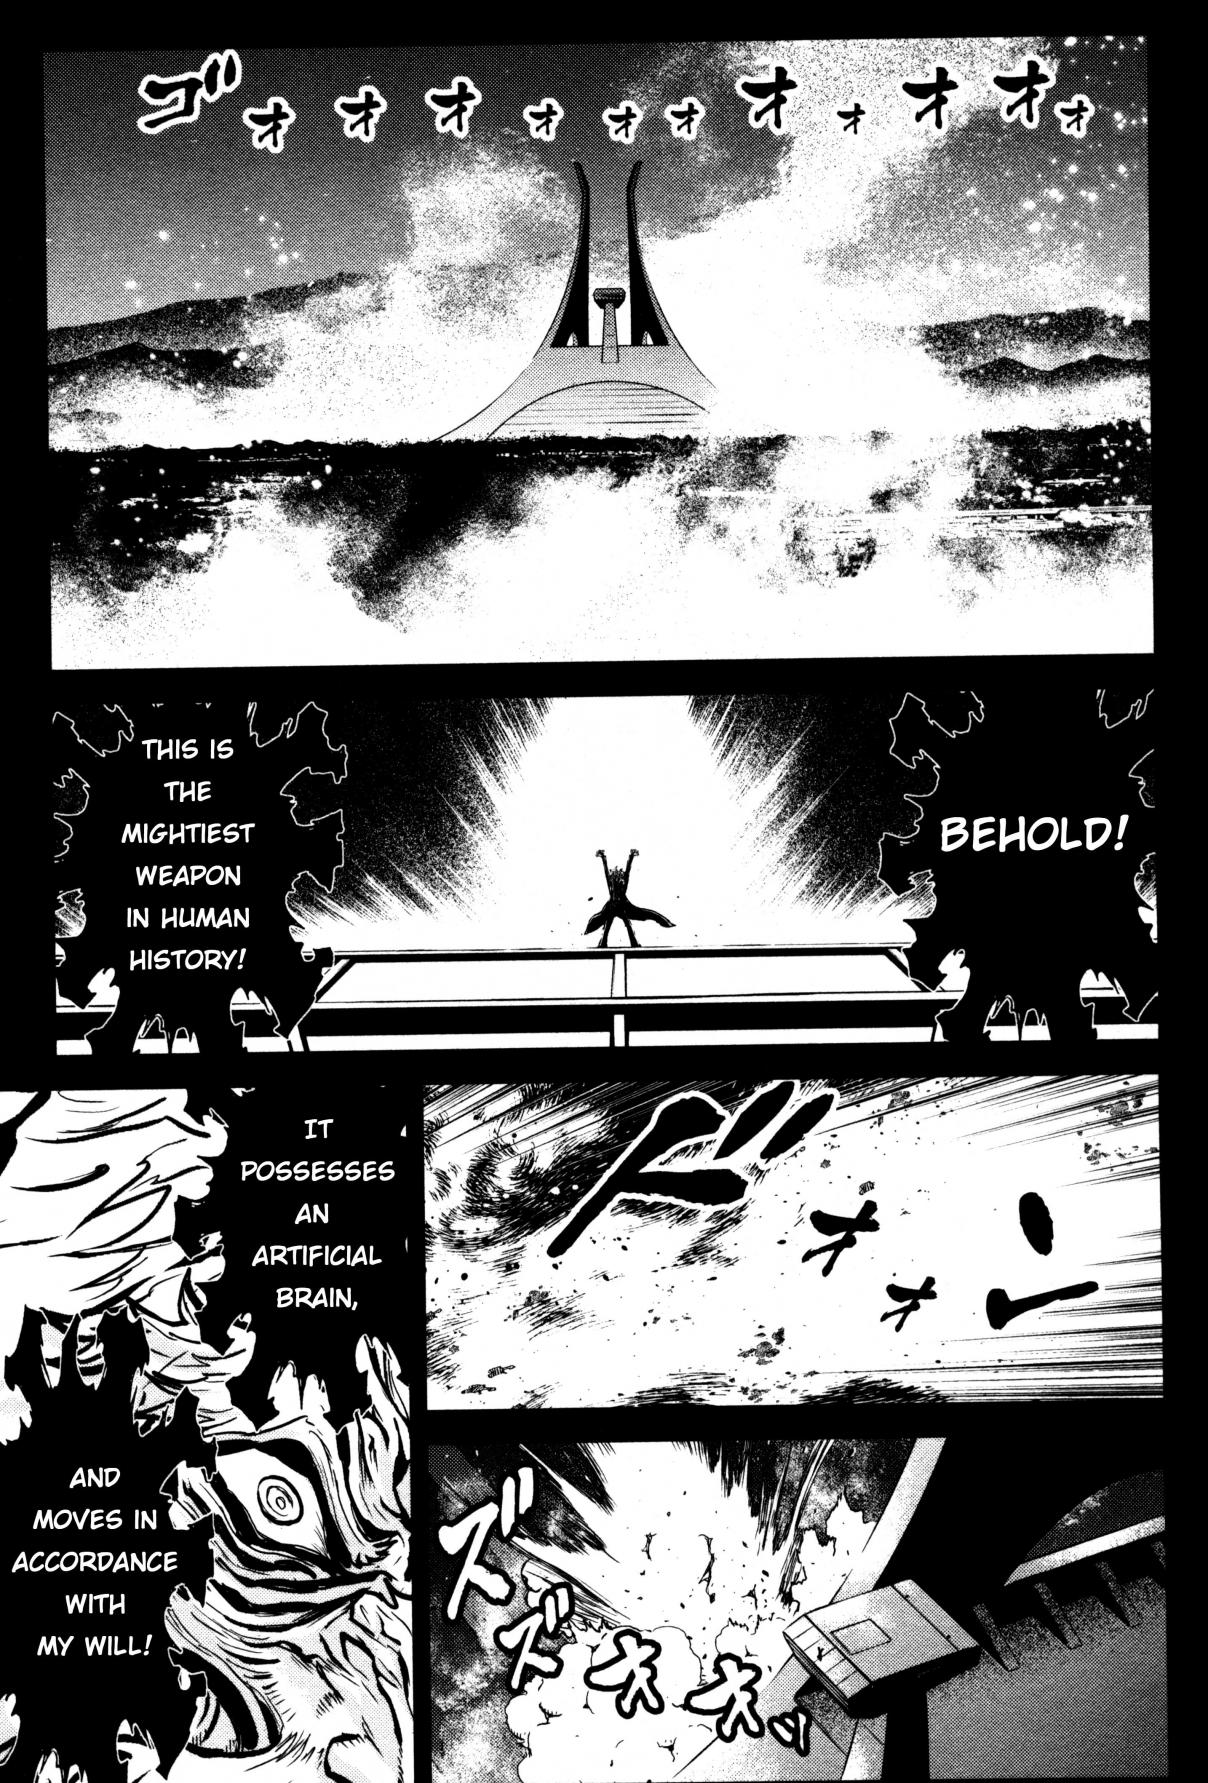 Shin Mazinger Zero Vol. 5 Ch. 24 To a Genius, a Night May be More Than a Night